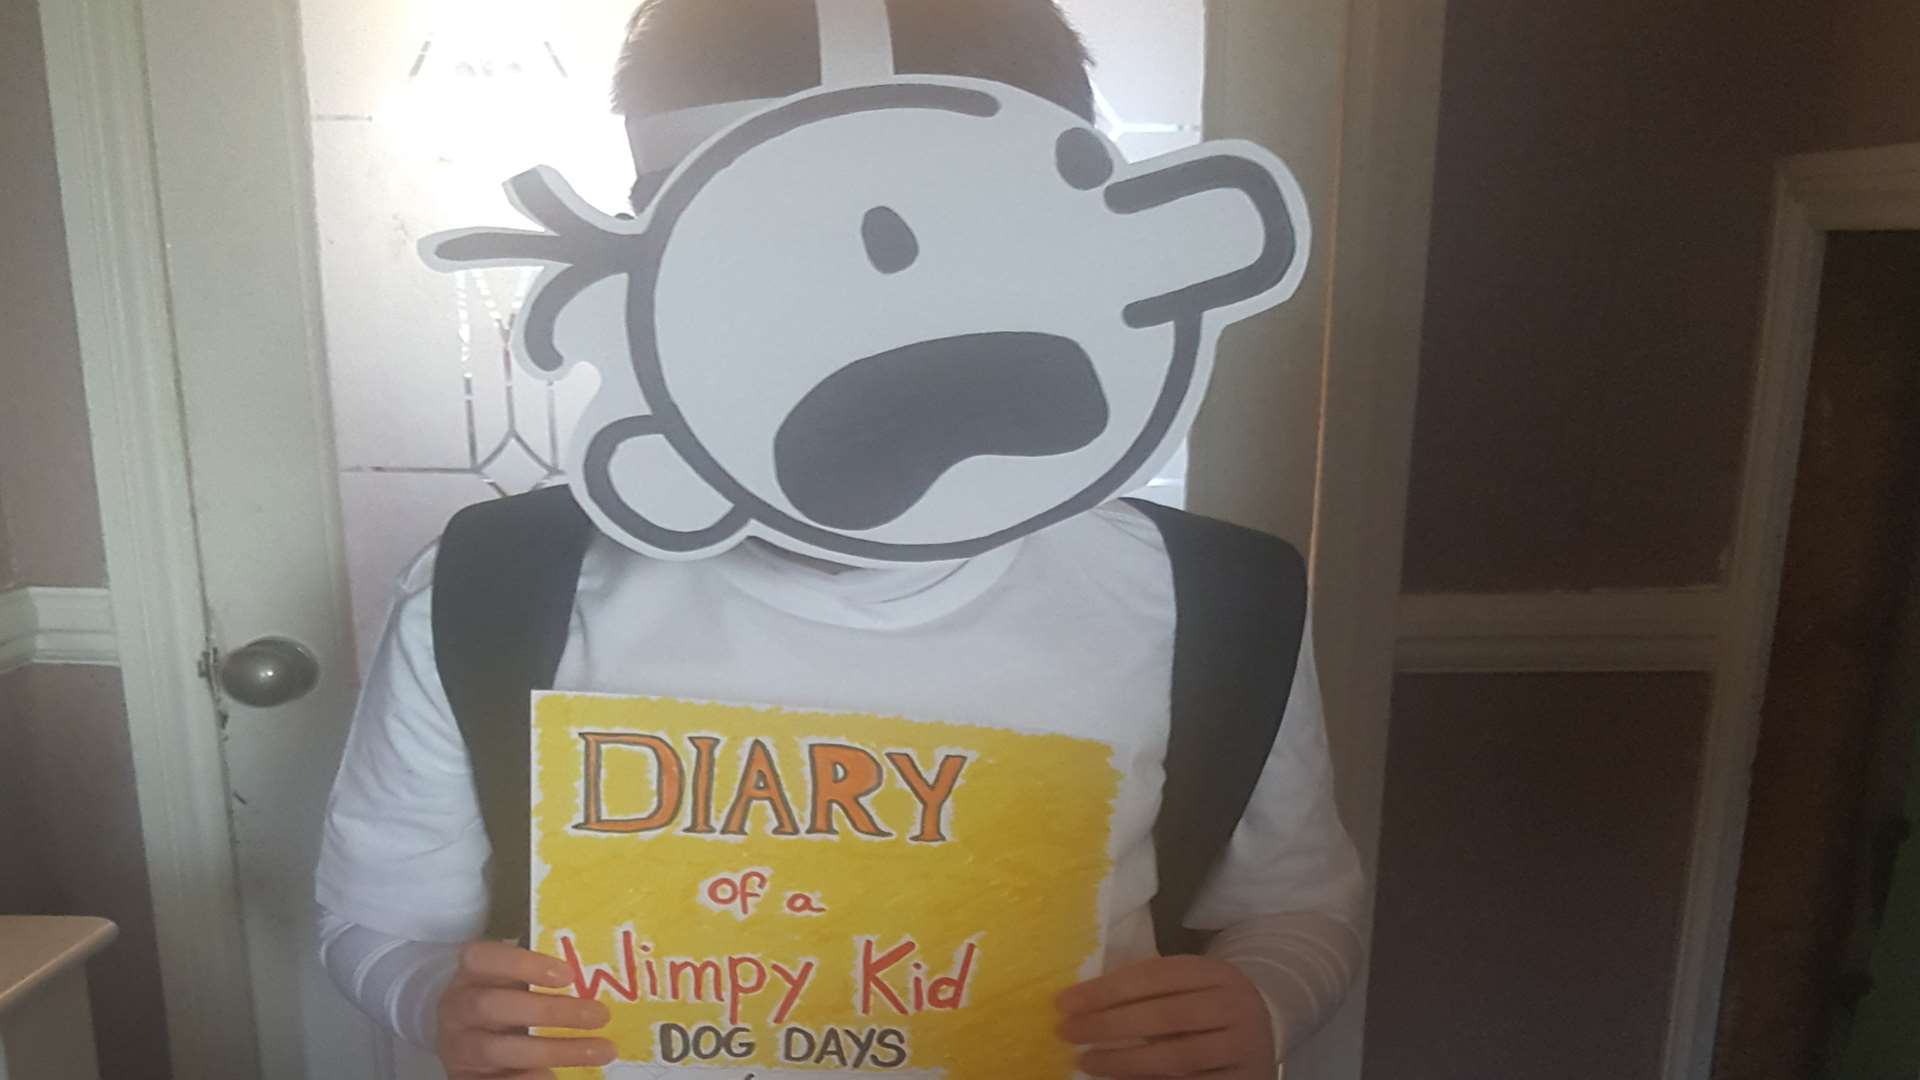 Tommy aged 10 dressed as Diary of a wimpy kid.